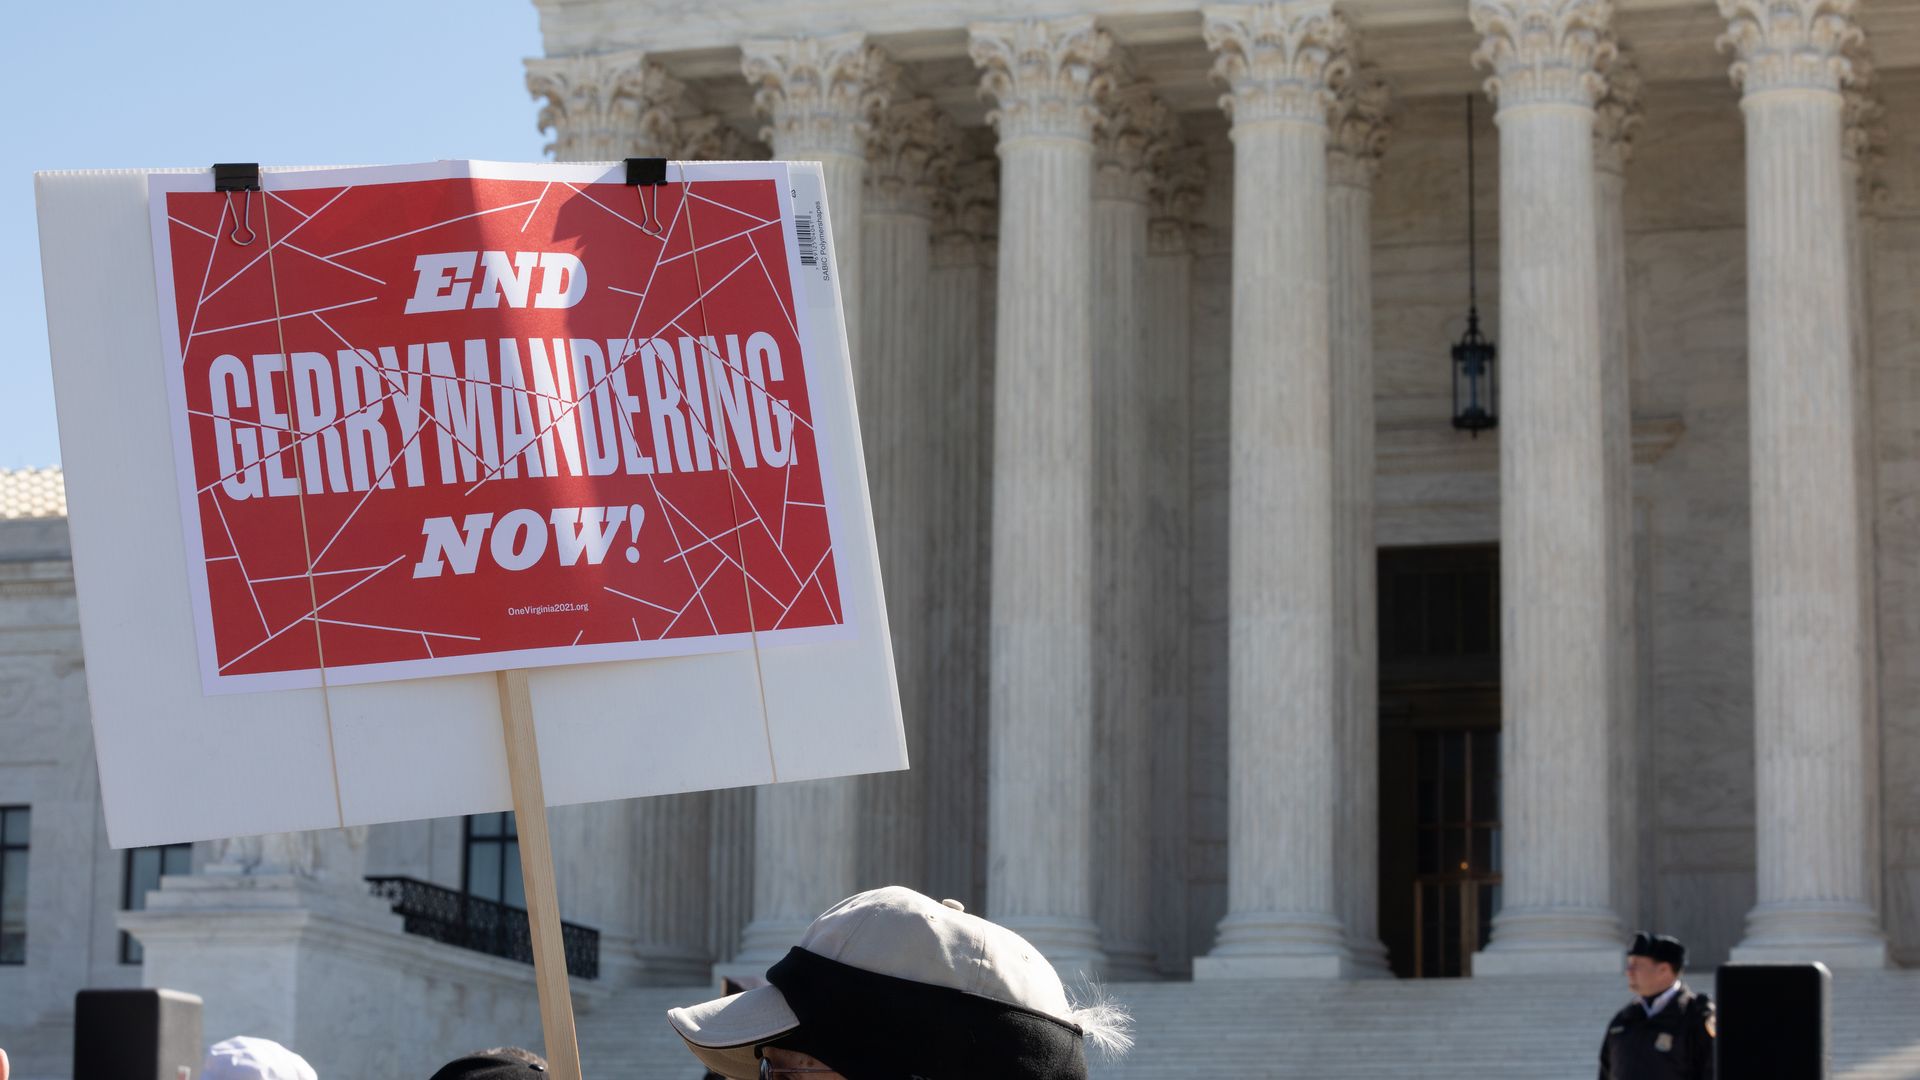 A protester waves a "Stop gerrymandering now" sign outside the Supreme Court